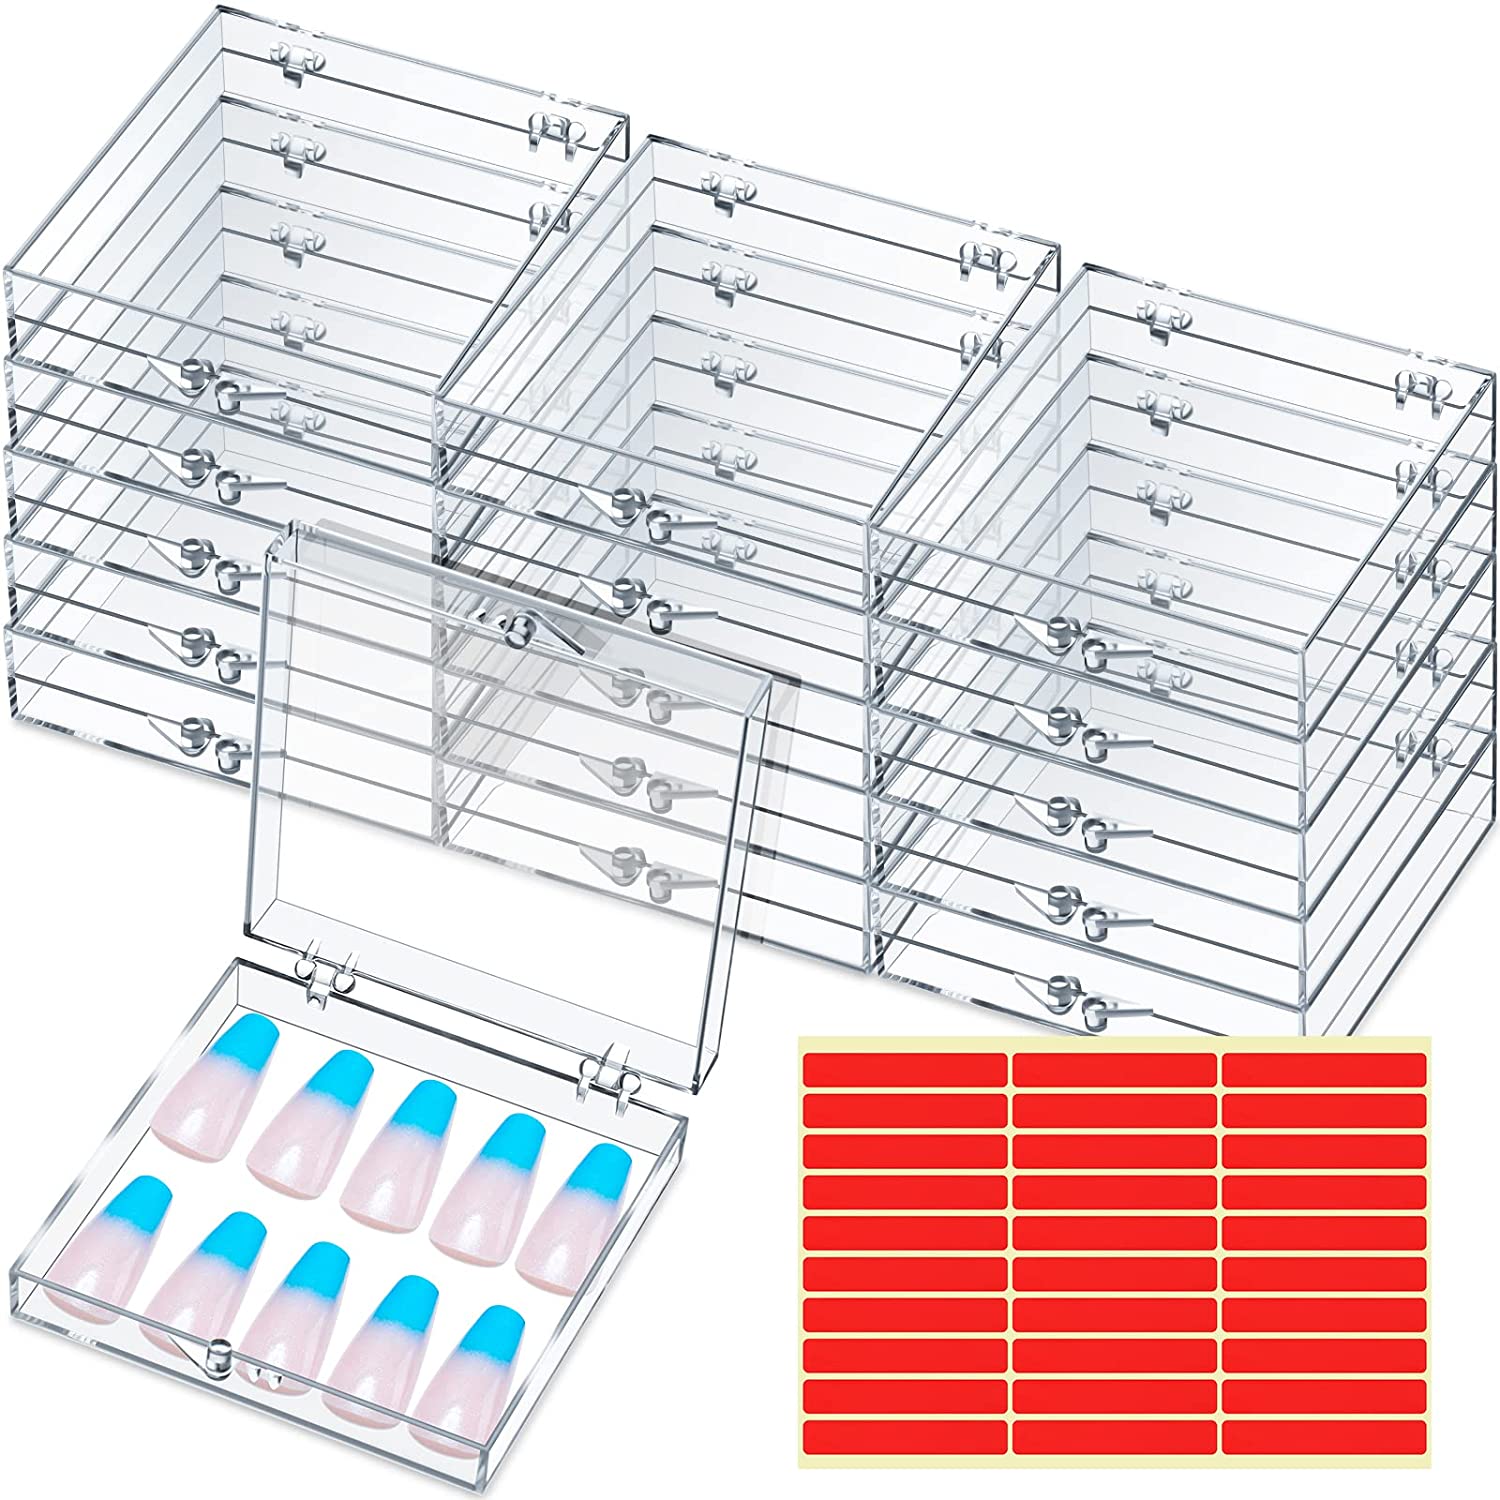 Clear Box Storage Case for Organizing Professional Pedicure